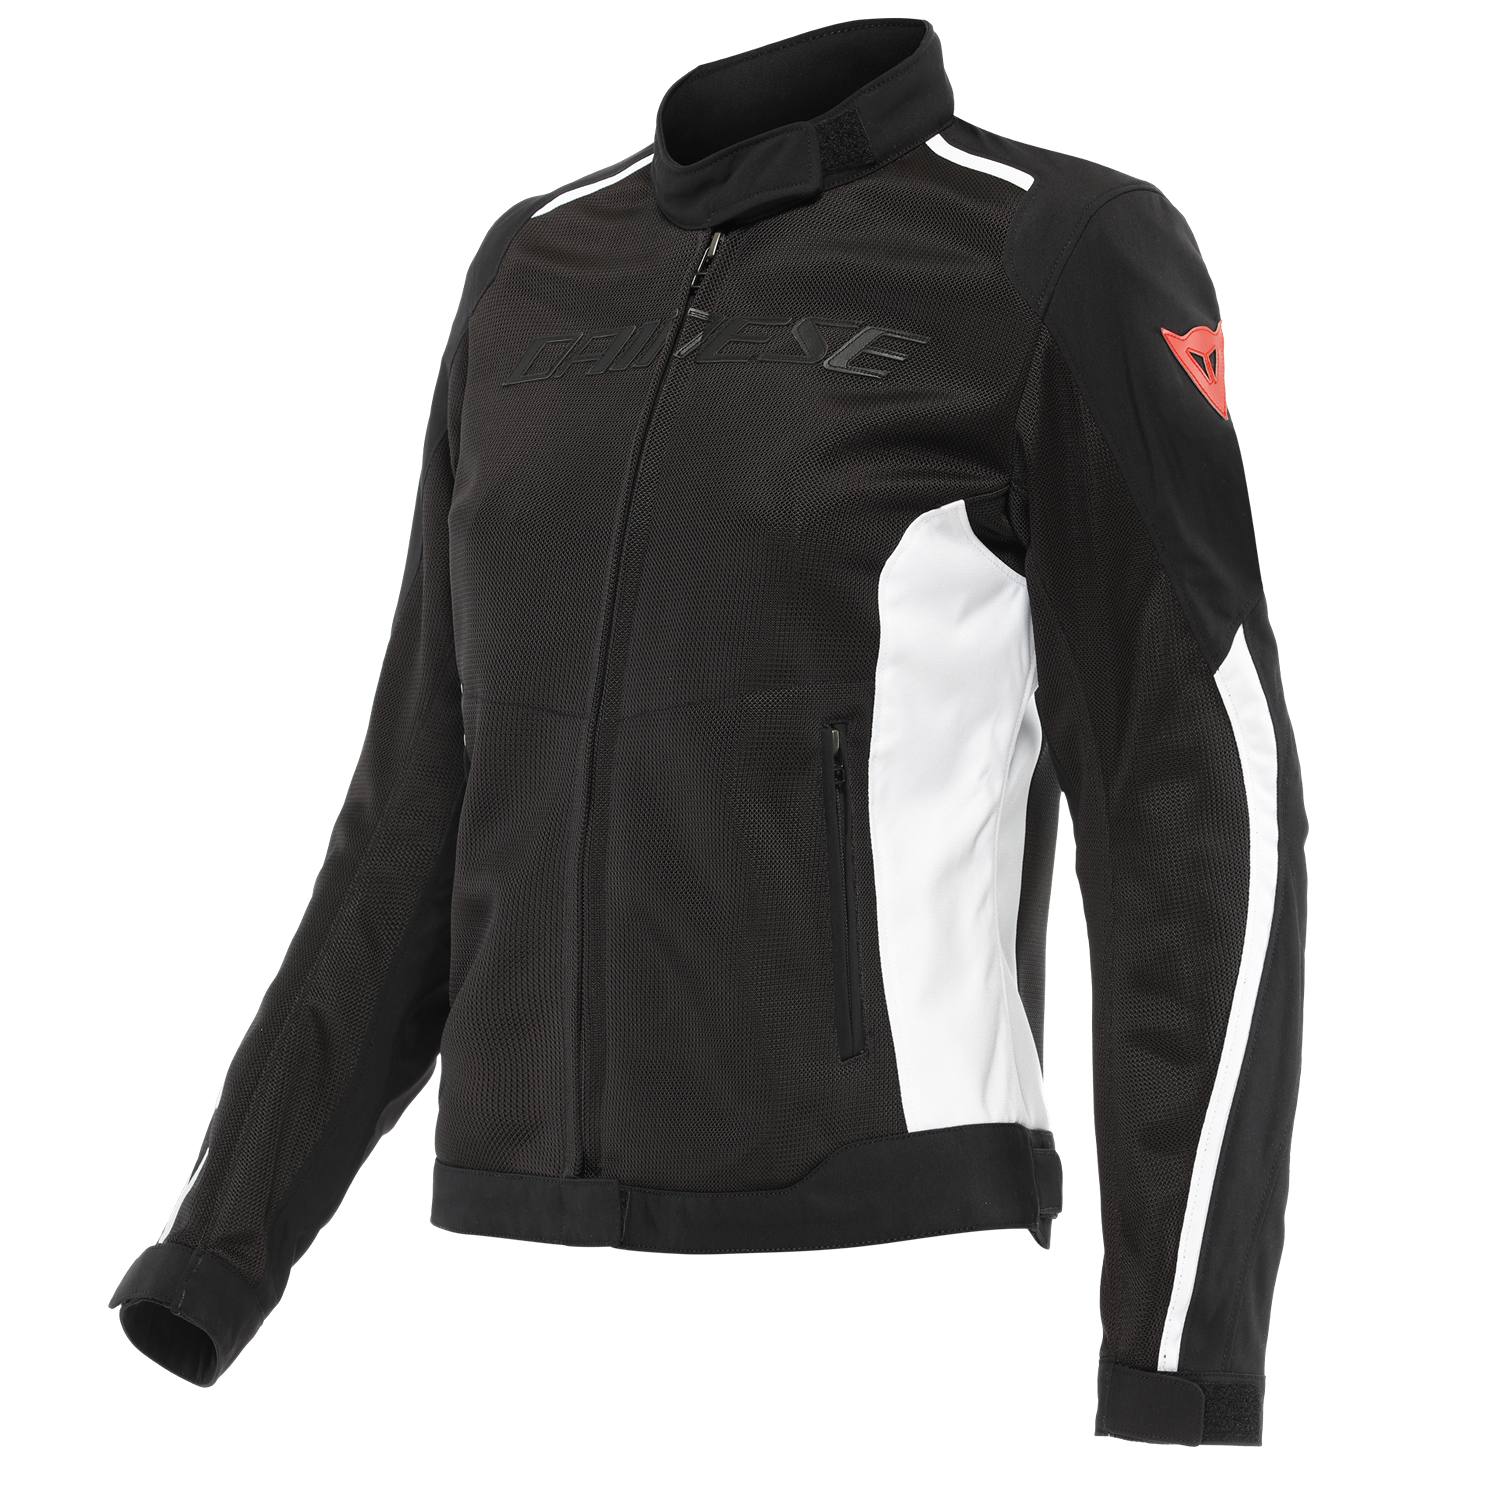 Image of Dainese Hydraflux 2 Air D-Dry Jacket Lady Black White Size 42 ID 8051019401700